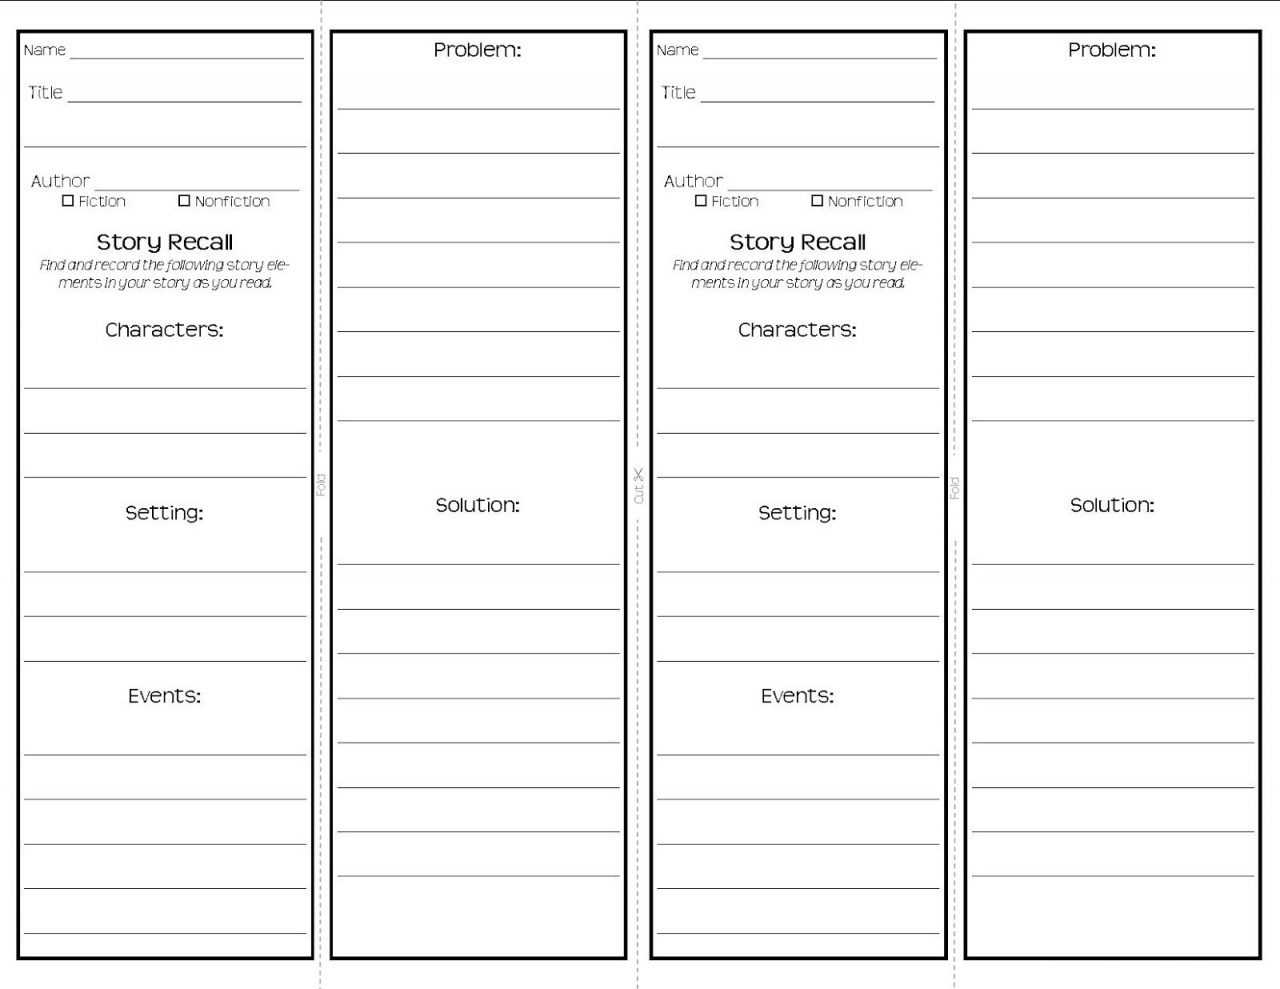 Bookmark Template For Word - Dalep.midnightpig.co Intended For Free Blank Bookmark Templates To Print